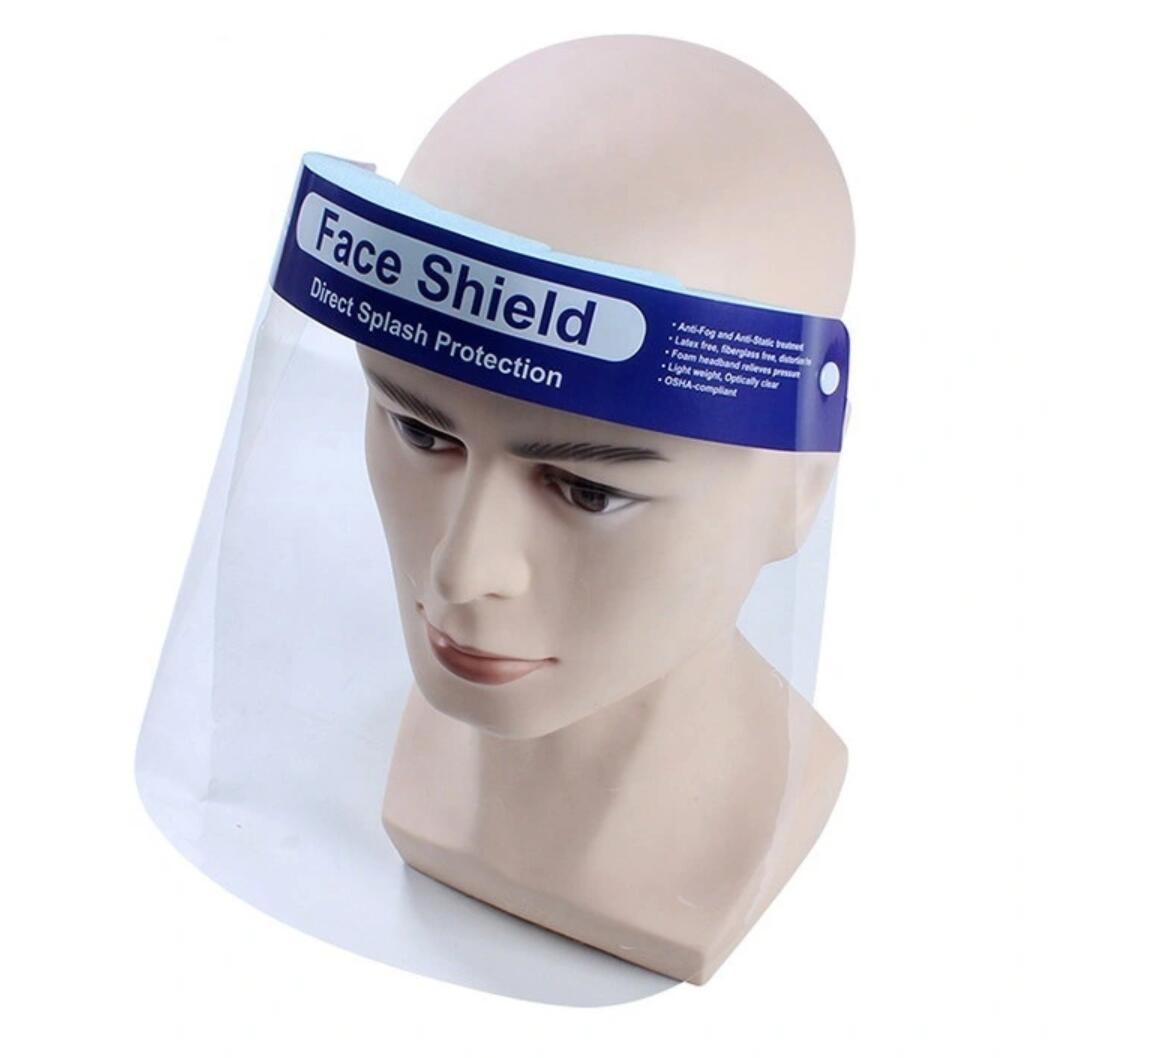 Buy Face Shield Disposable Online | Safety | Qetaat.com